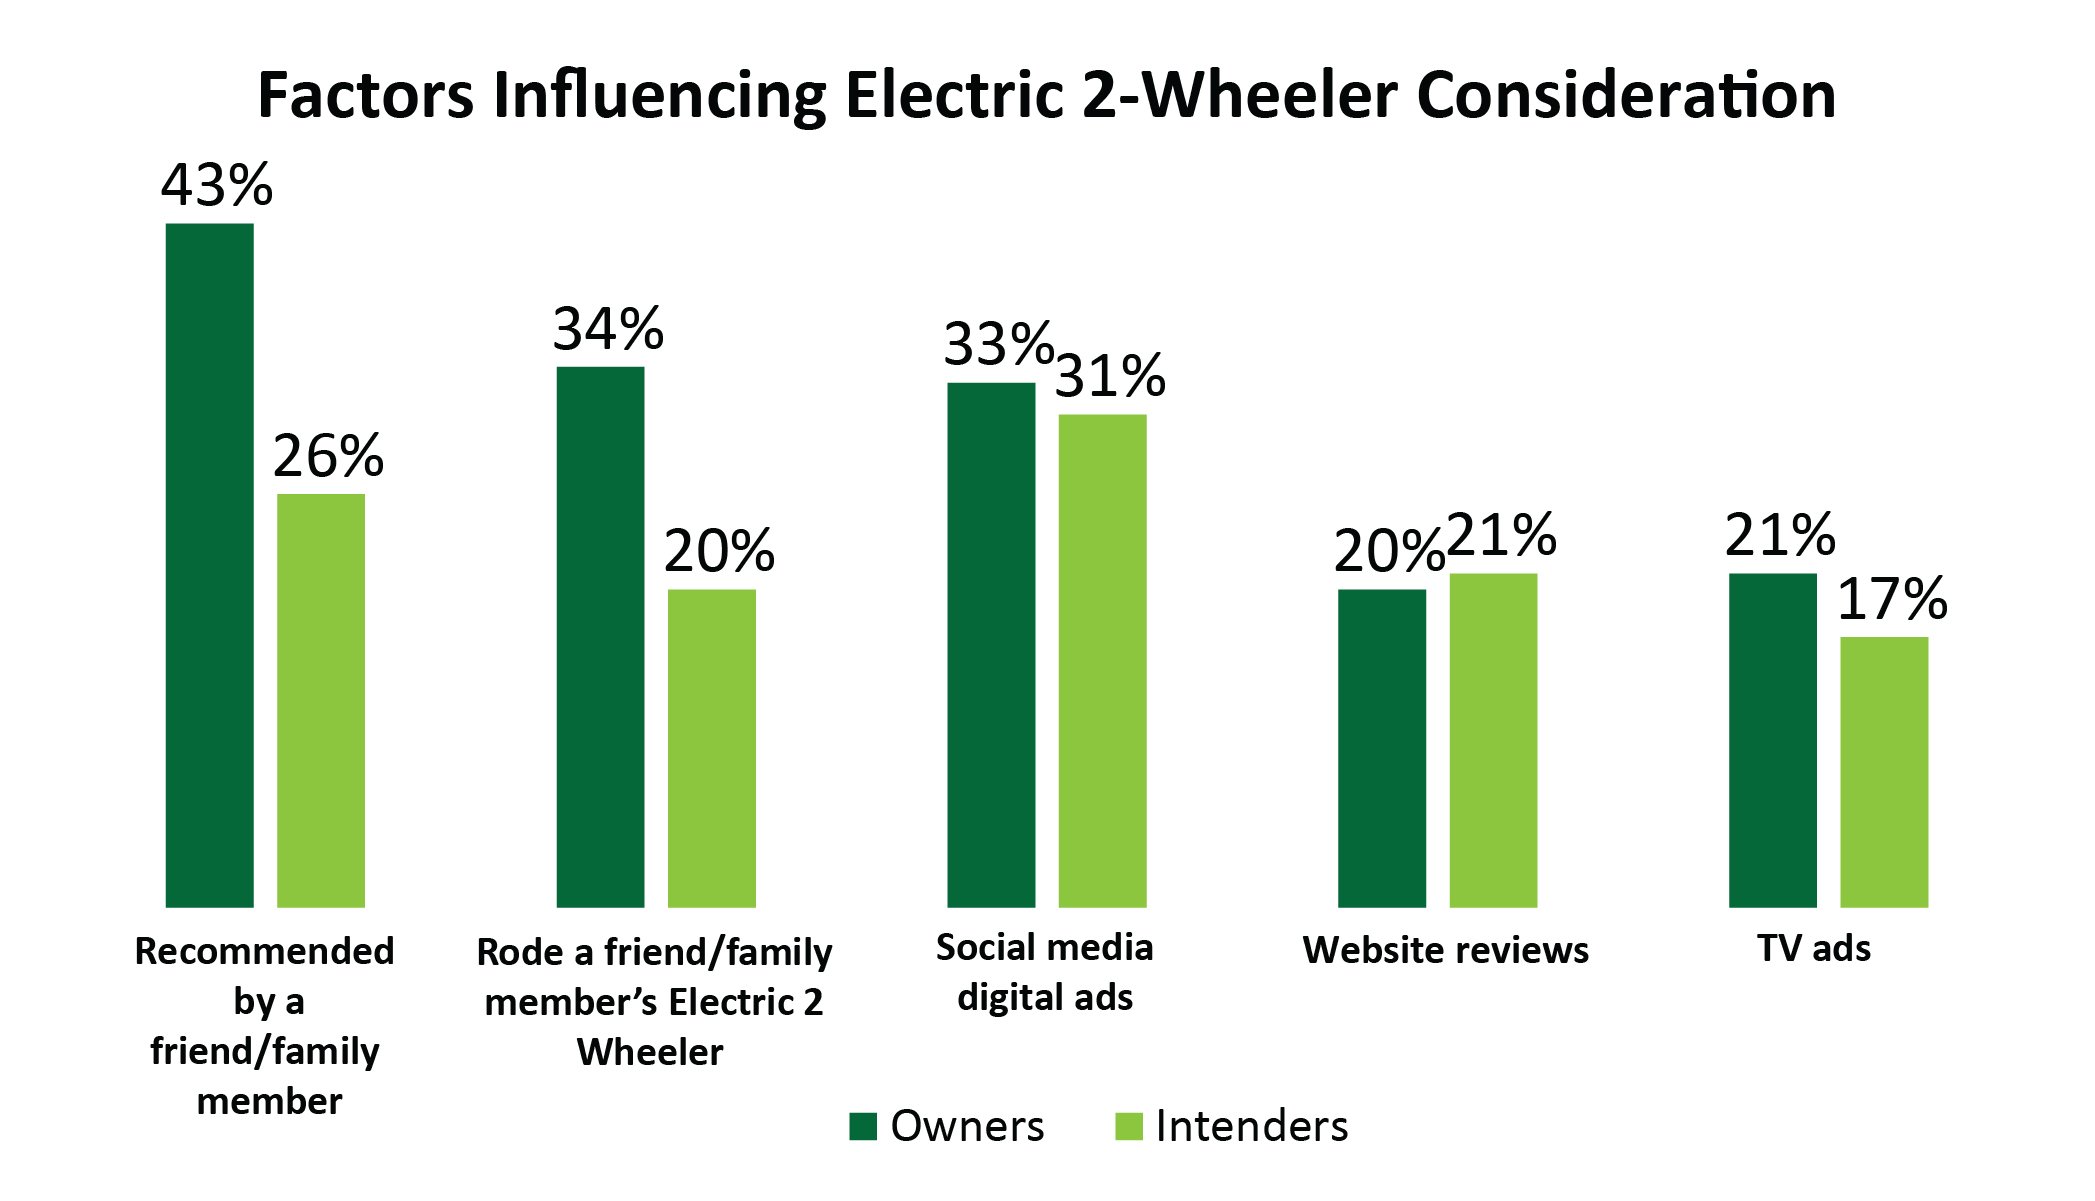 Influencing factors for electric 2-wheelers